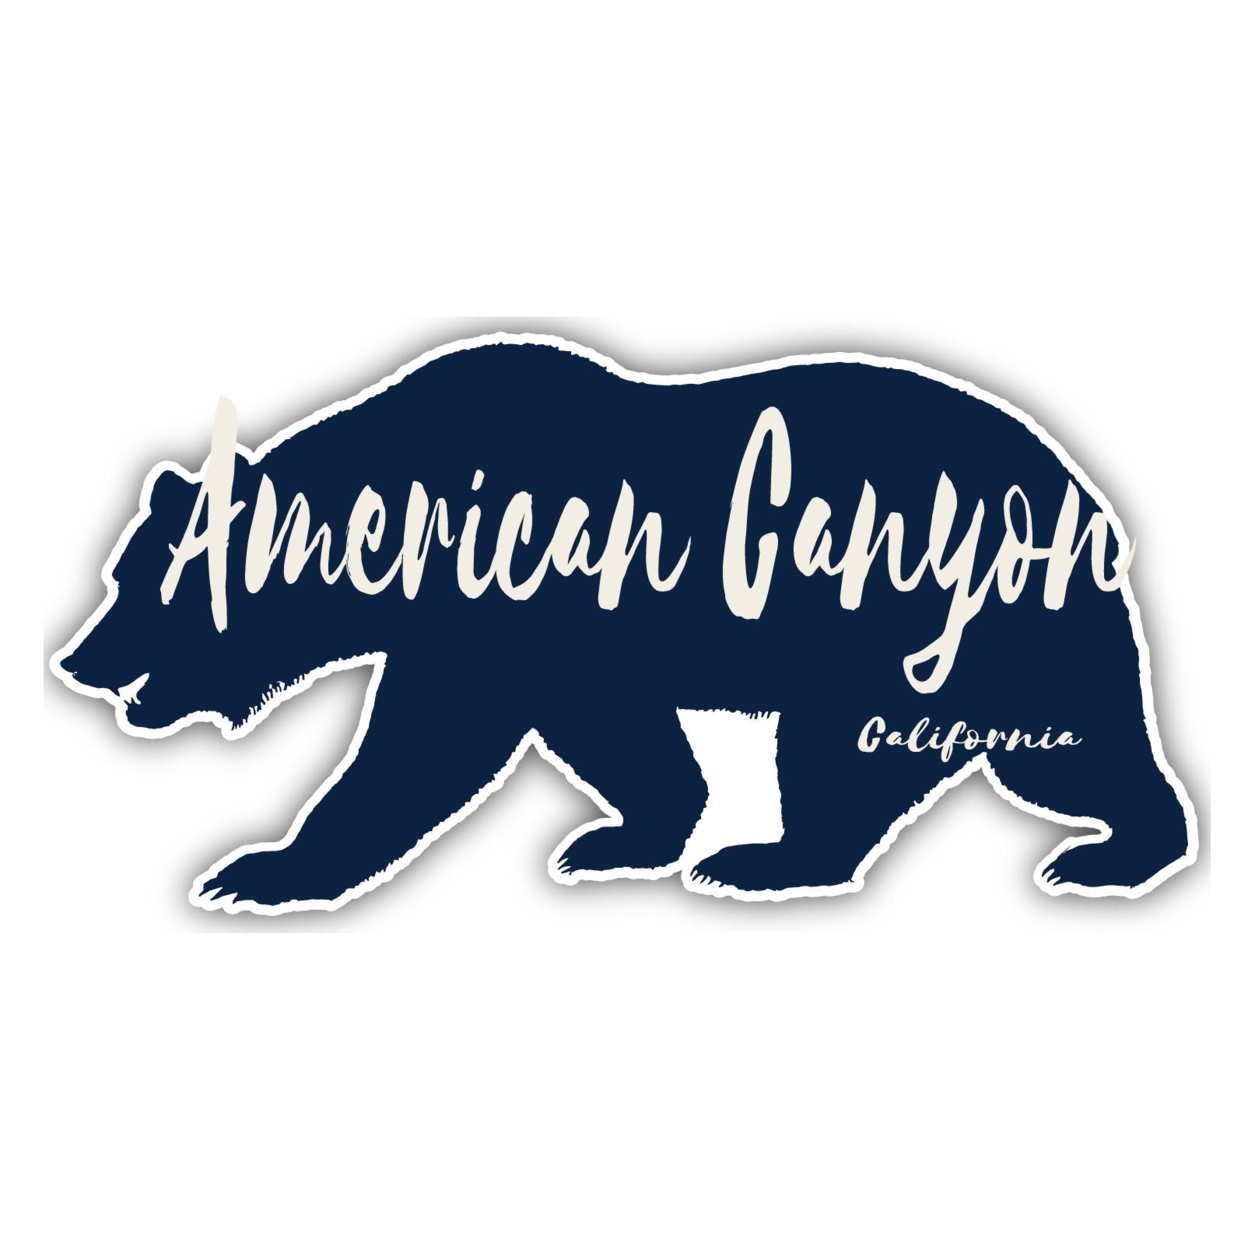 American Canyon California Souvenir Decorative Stickers (Choose Theme And Size) - 4-Pack, 10-Inch, Bear